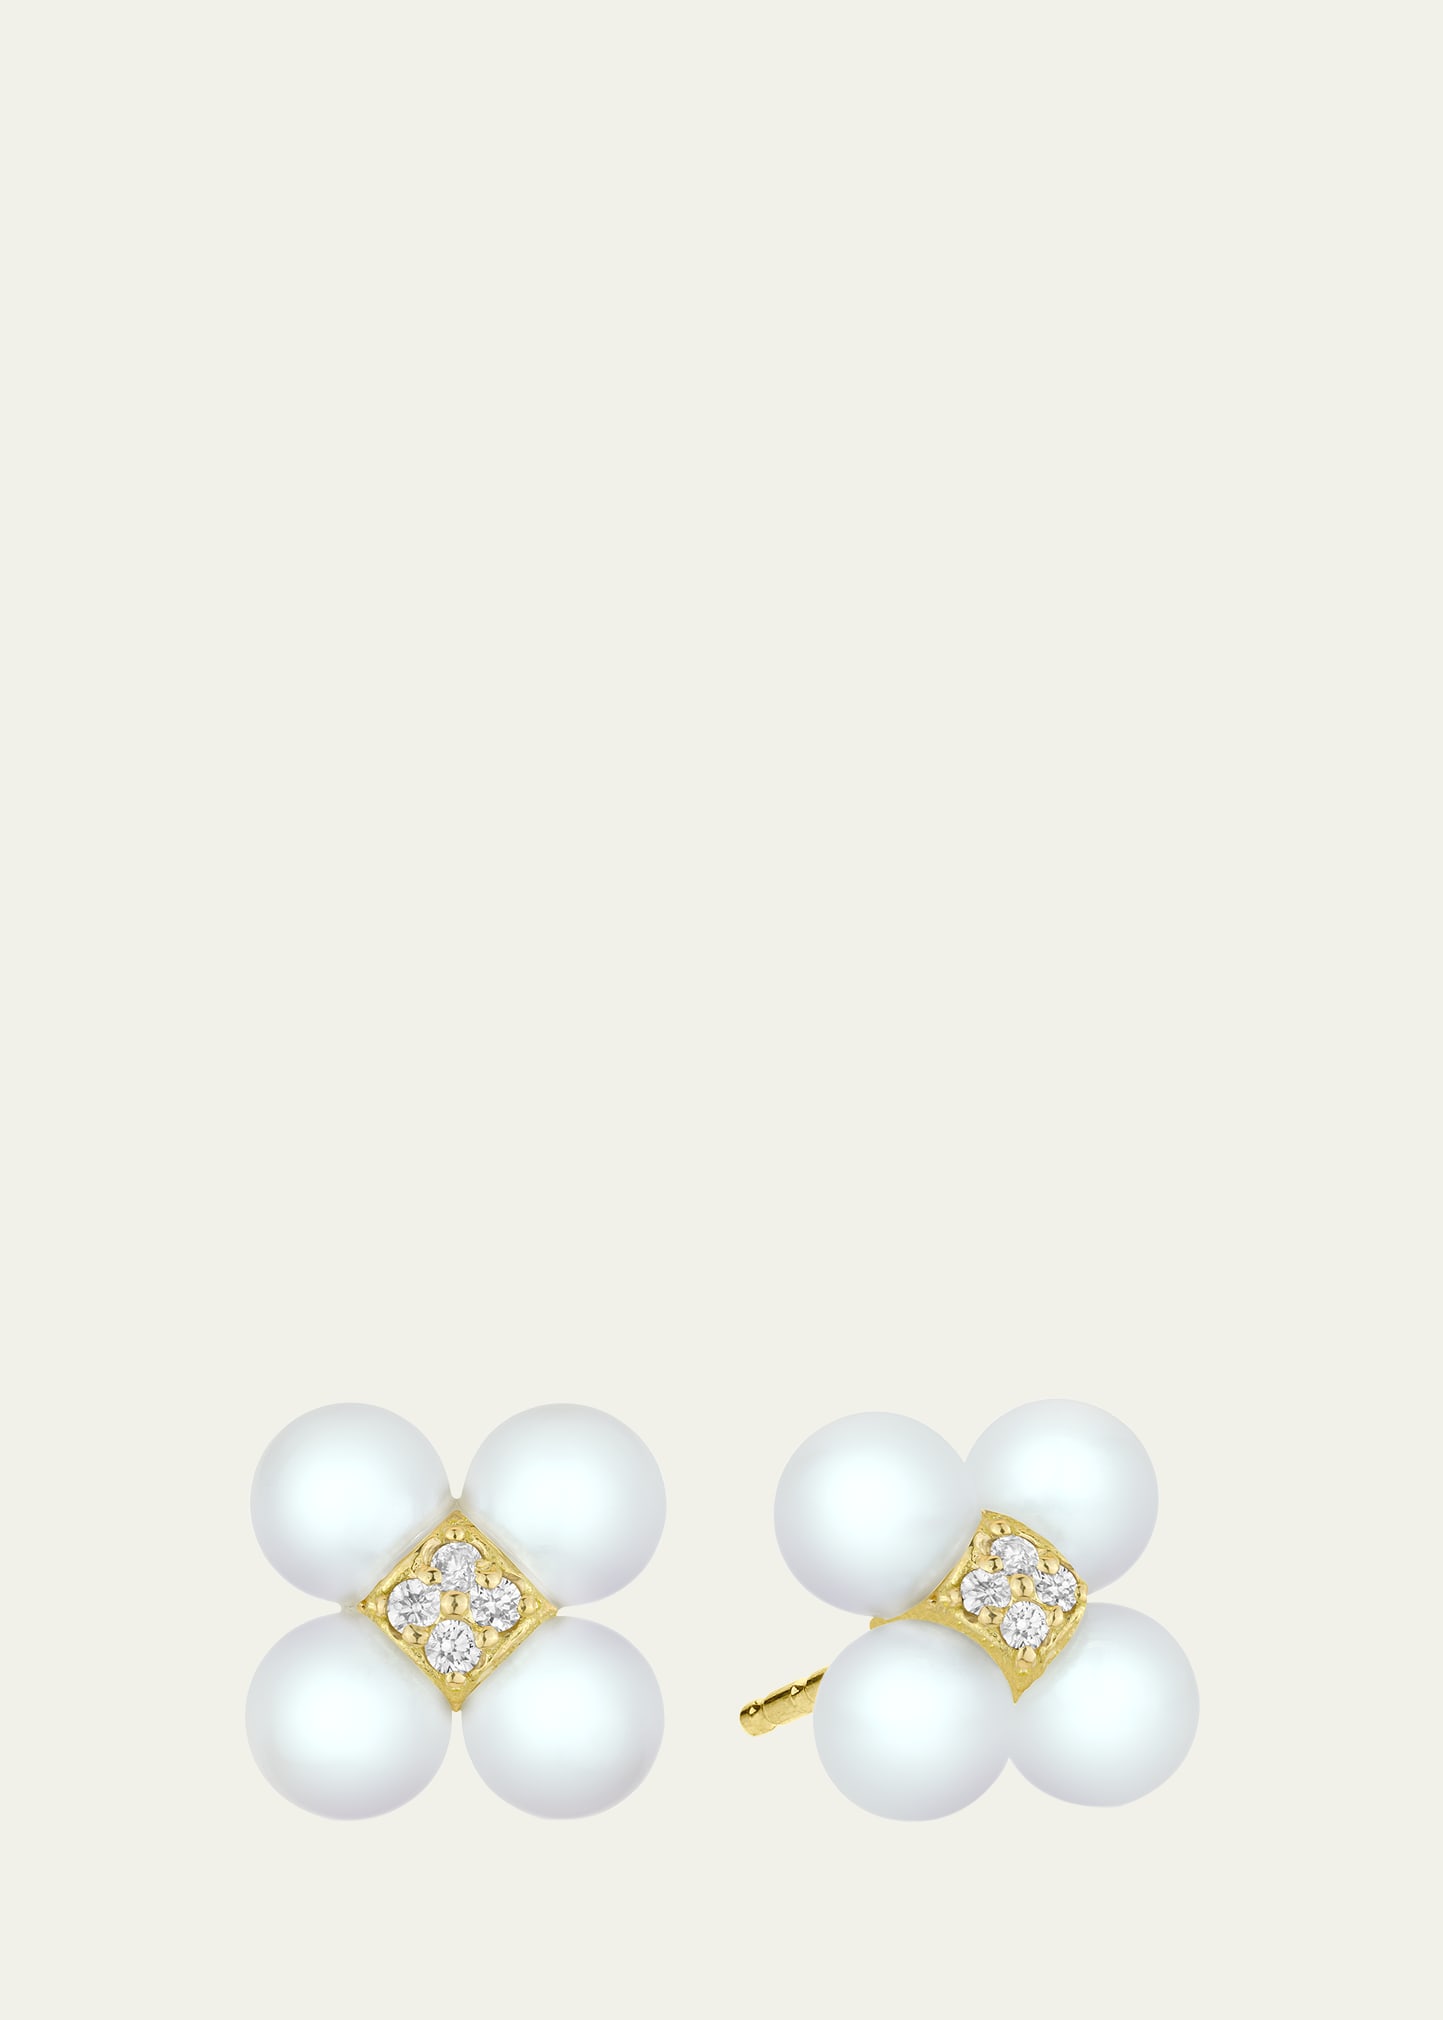 Yellow Gold Sequence Stud Earrings with Pearls and Diamonds